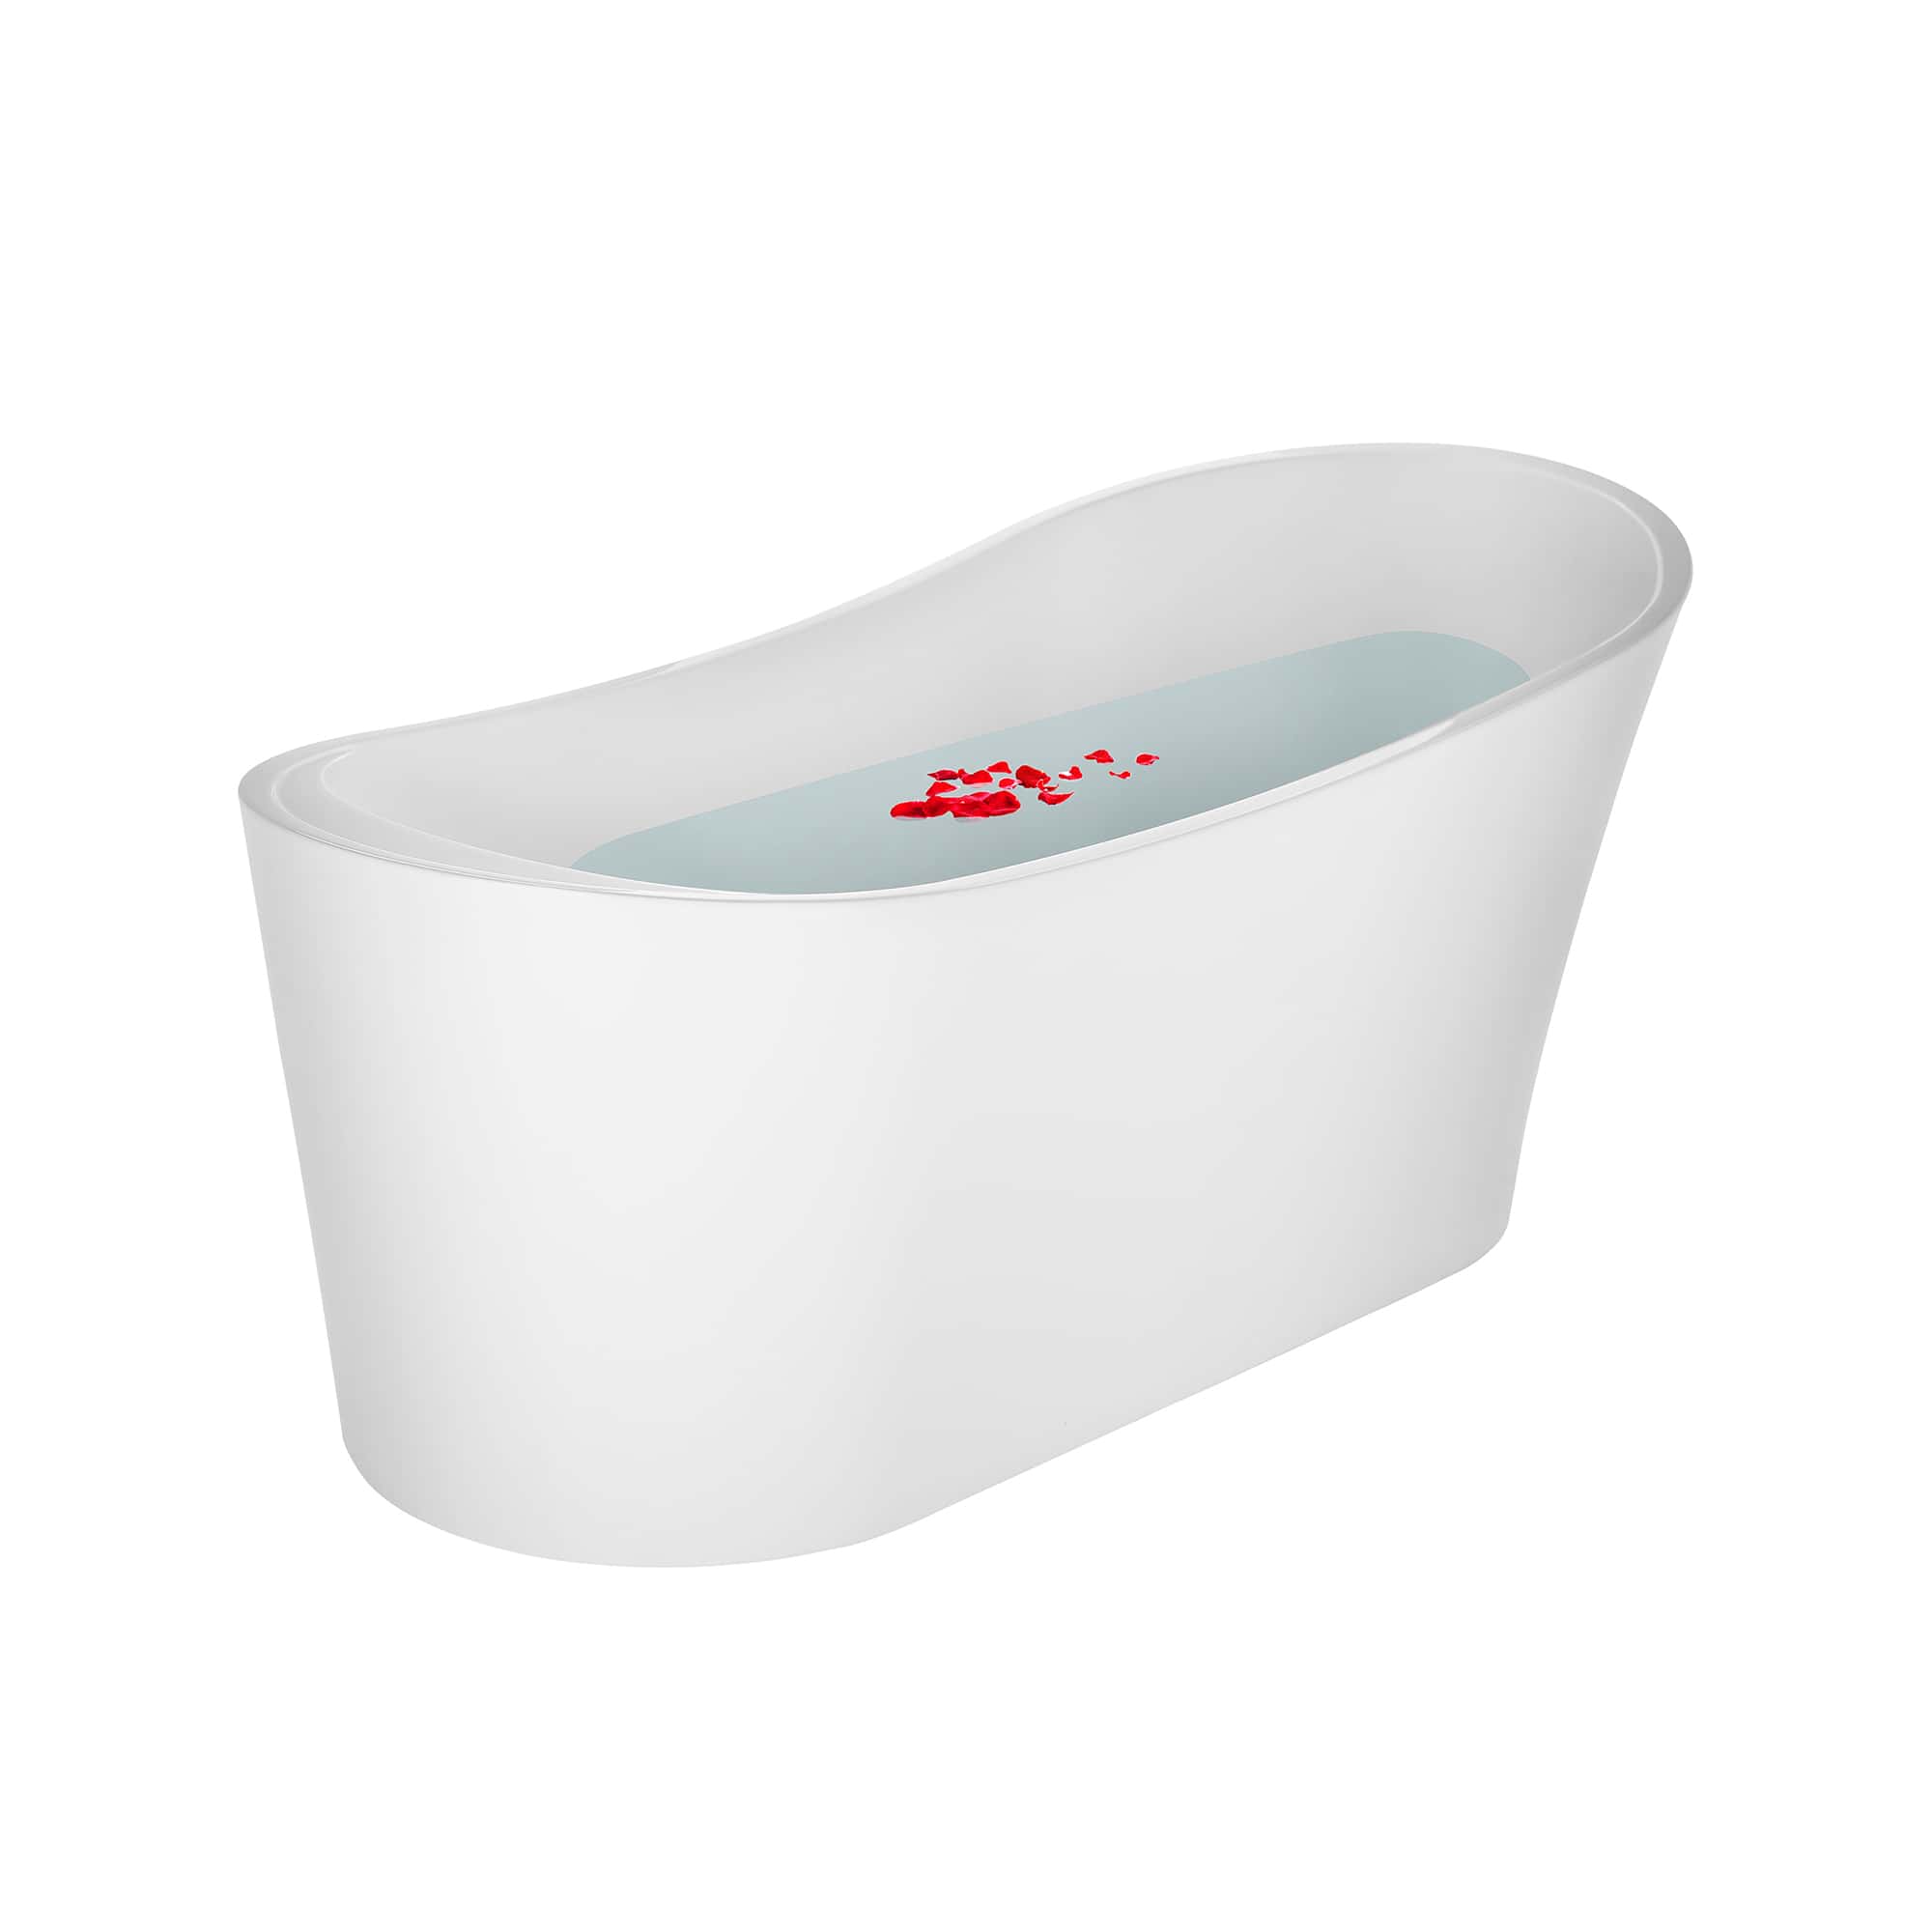 Empava-67FT1528 luxury freestanding acrylic soaking oval modern white SPA single-ended bathtub with water and petal